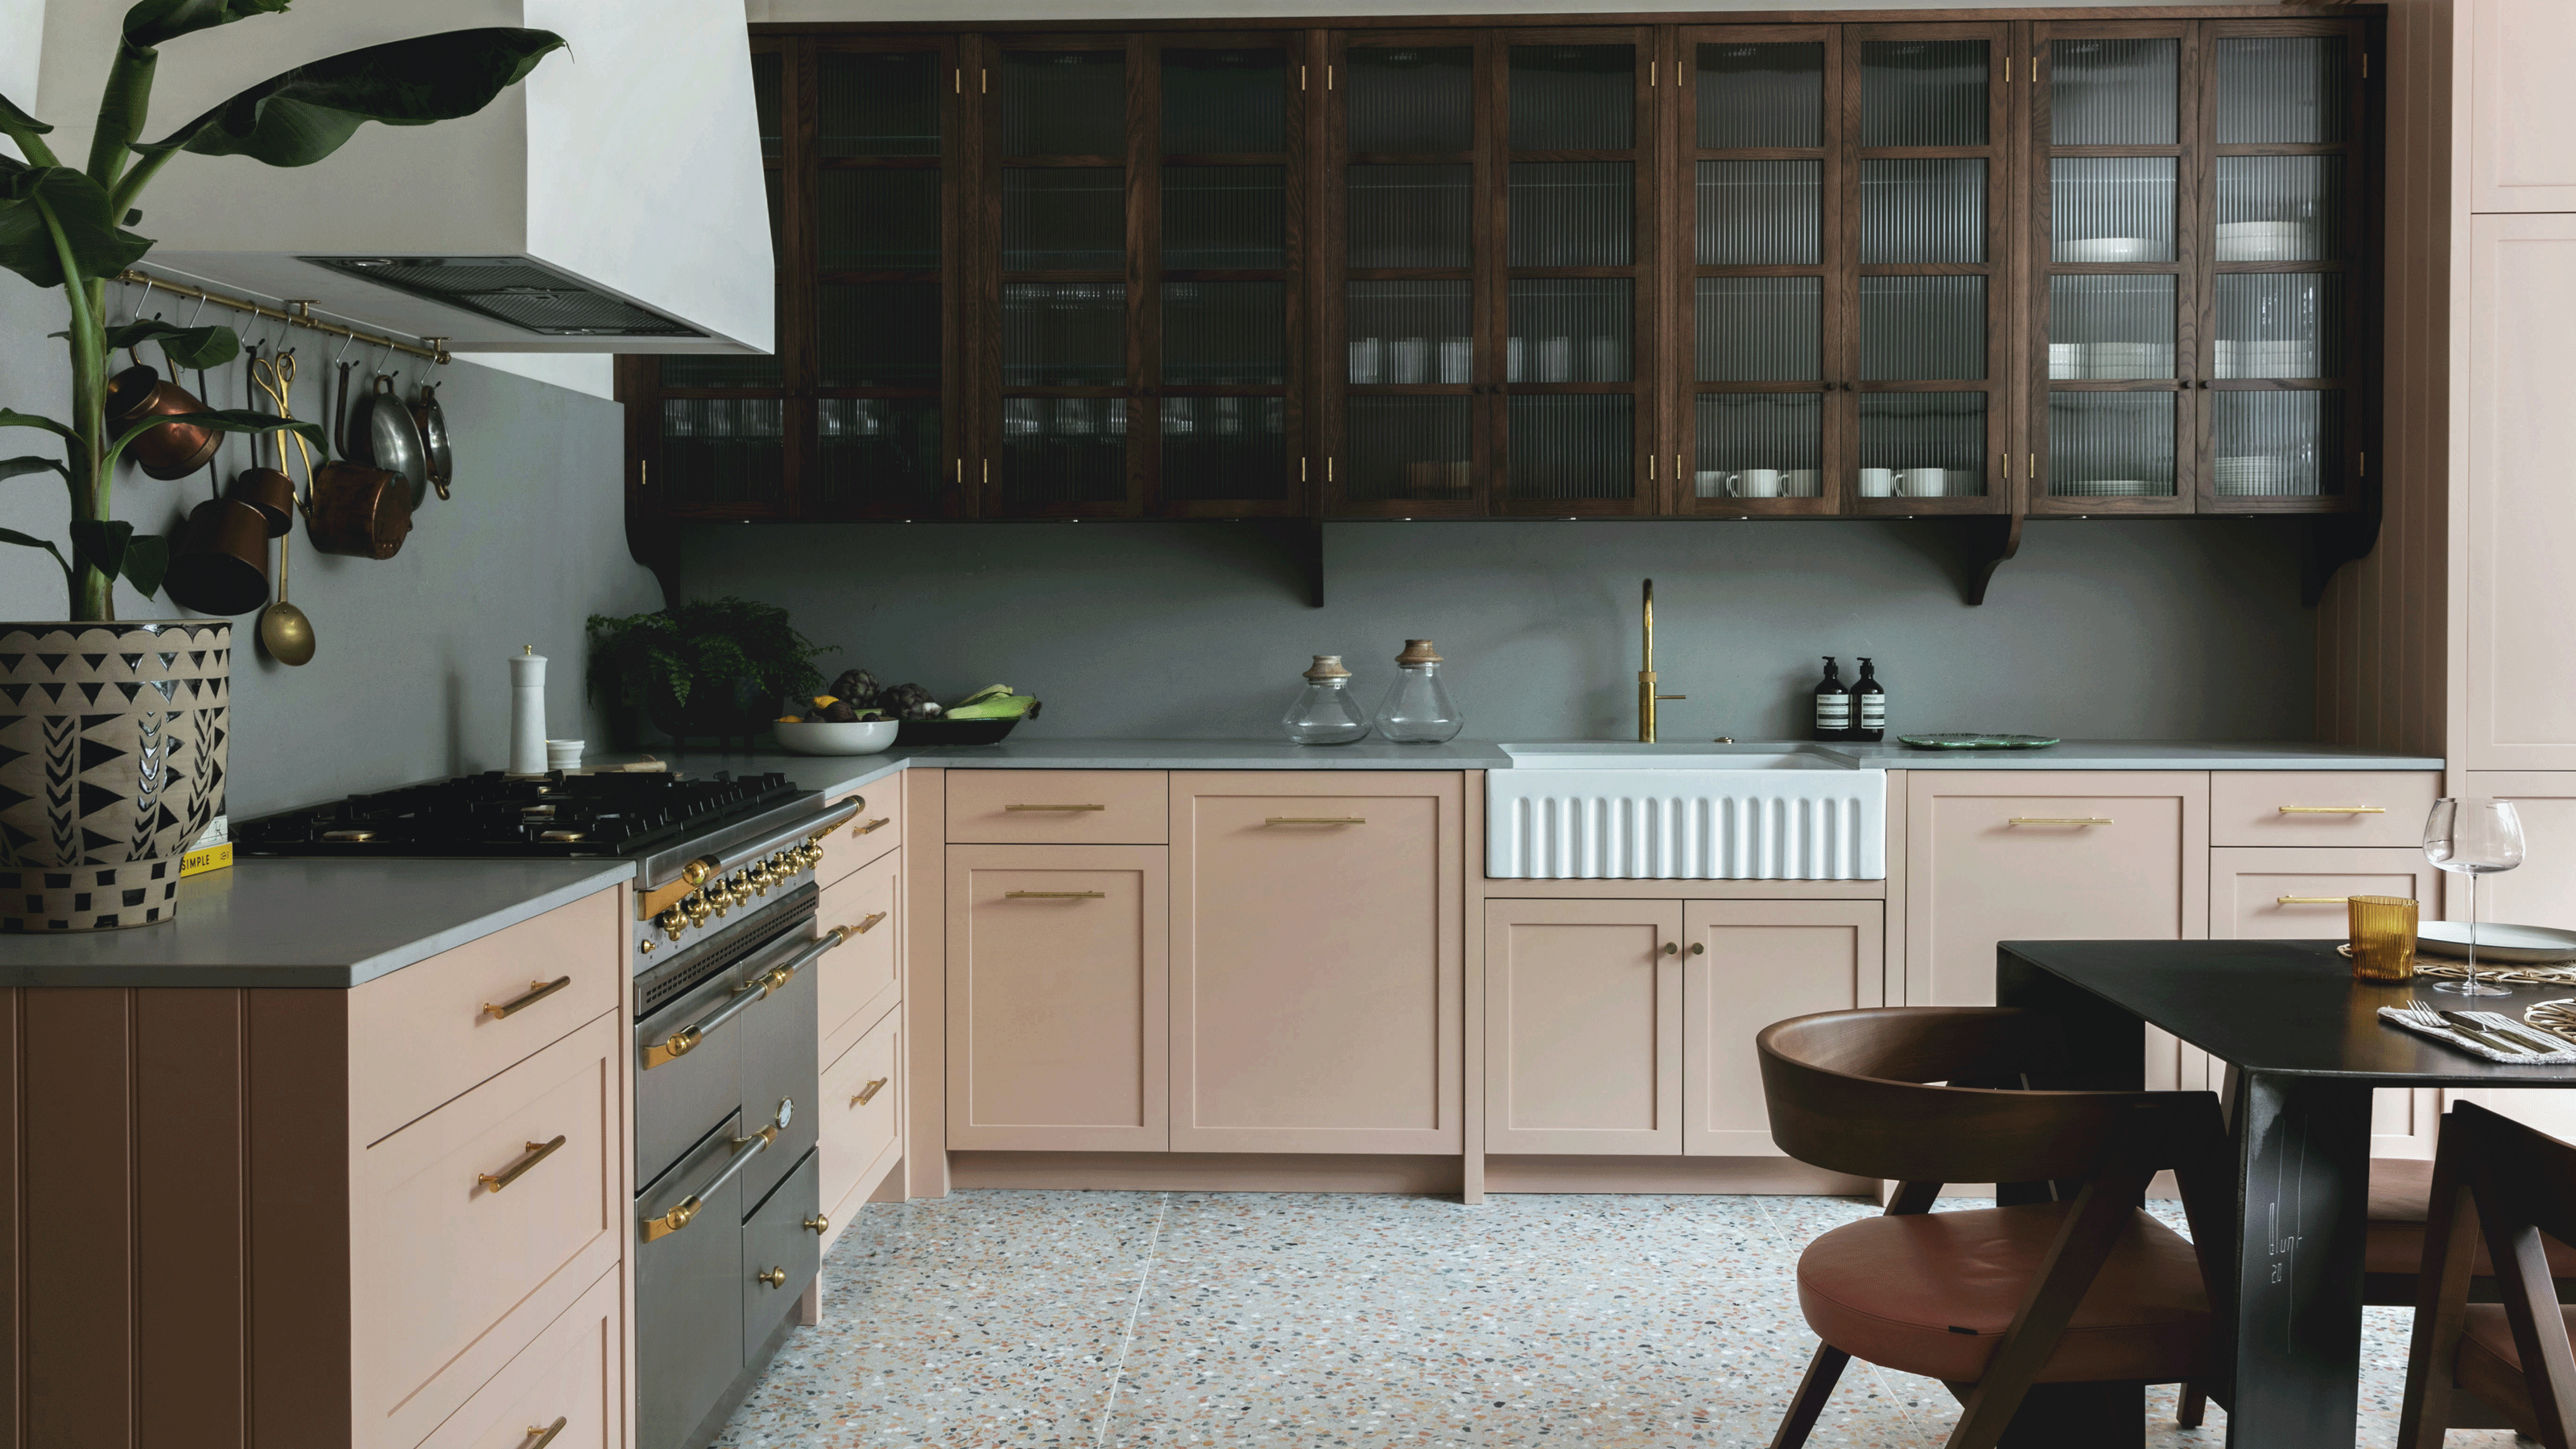 Two-tone kitchen with pink base cabinets and wood wall cabinets with terrazzo floor